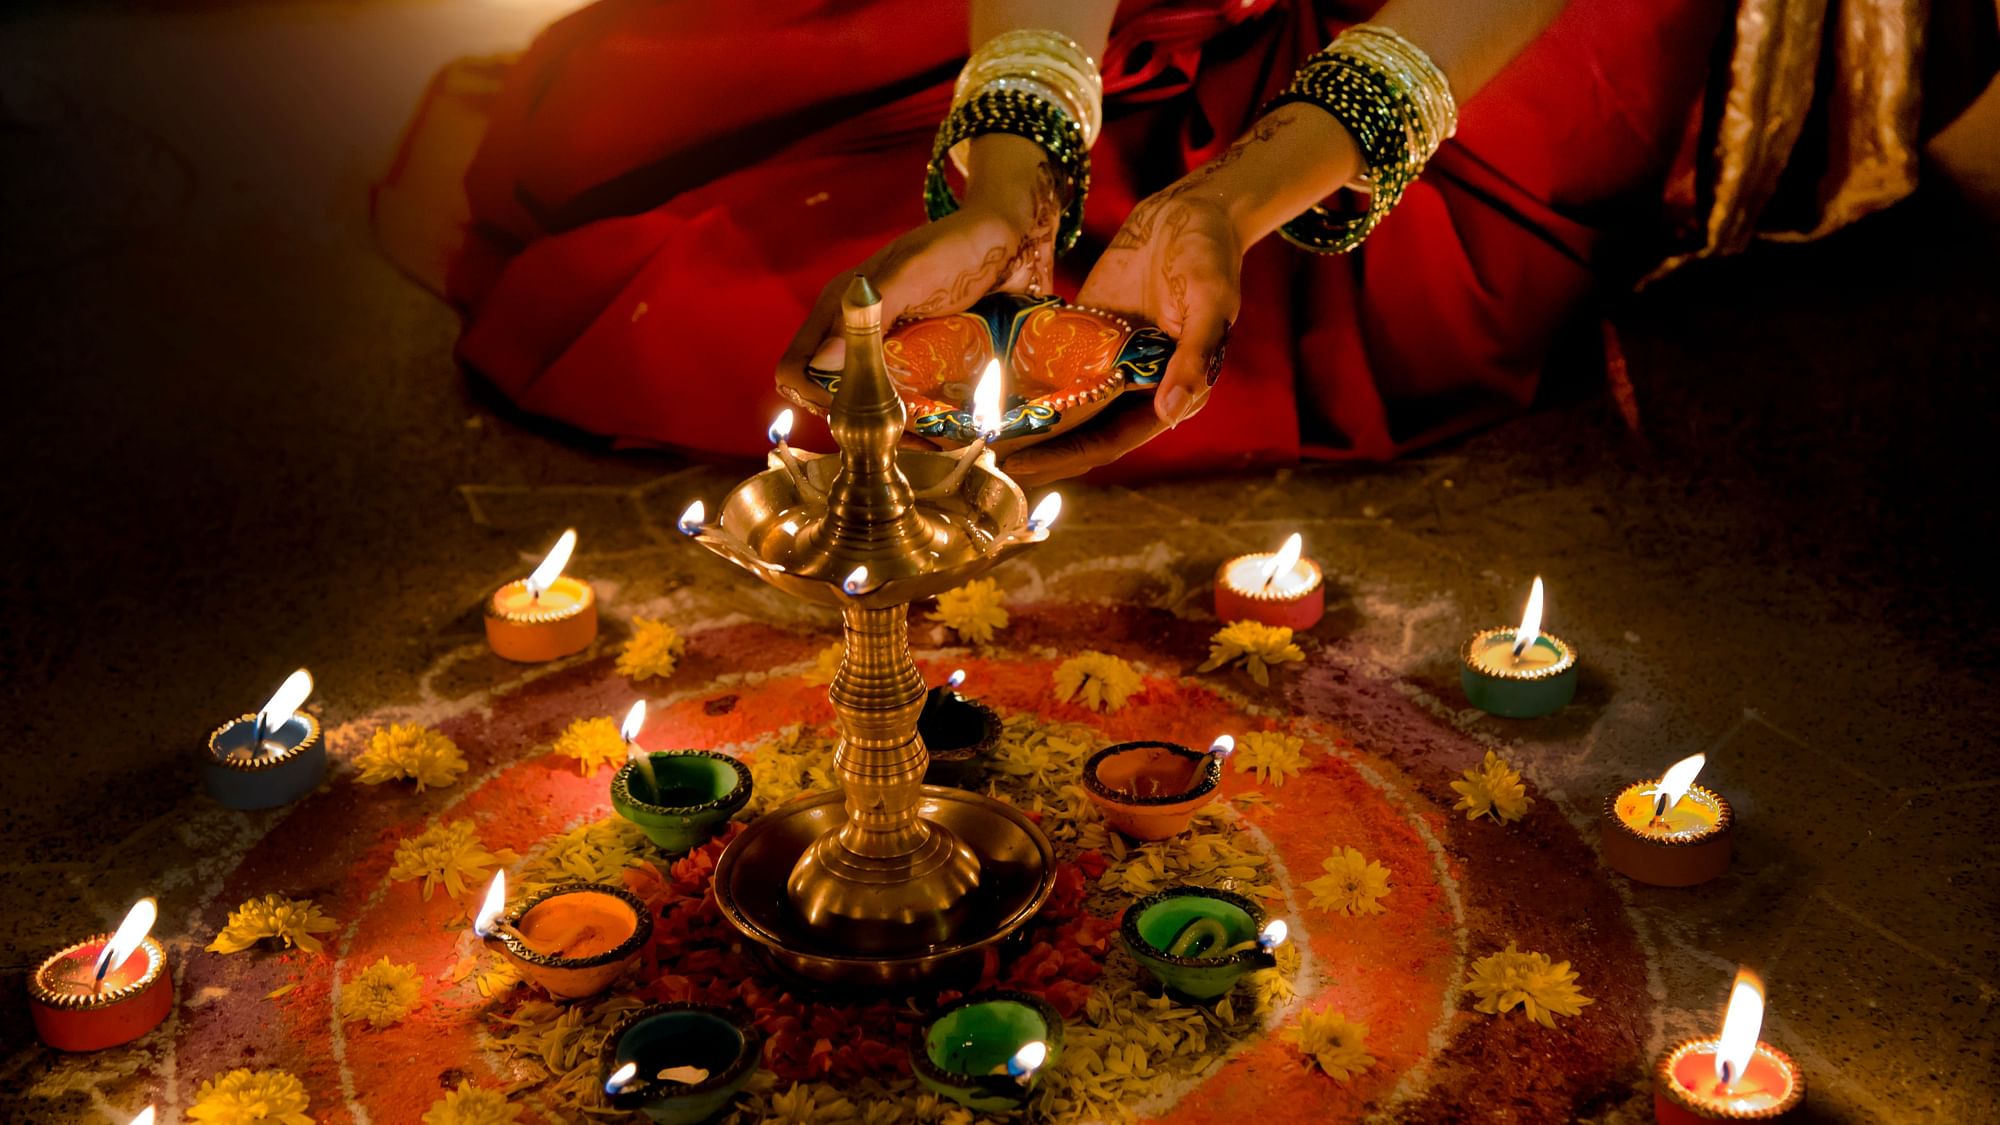 When is Diwali in 2020 and what’s the story behind celebrating it?